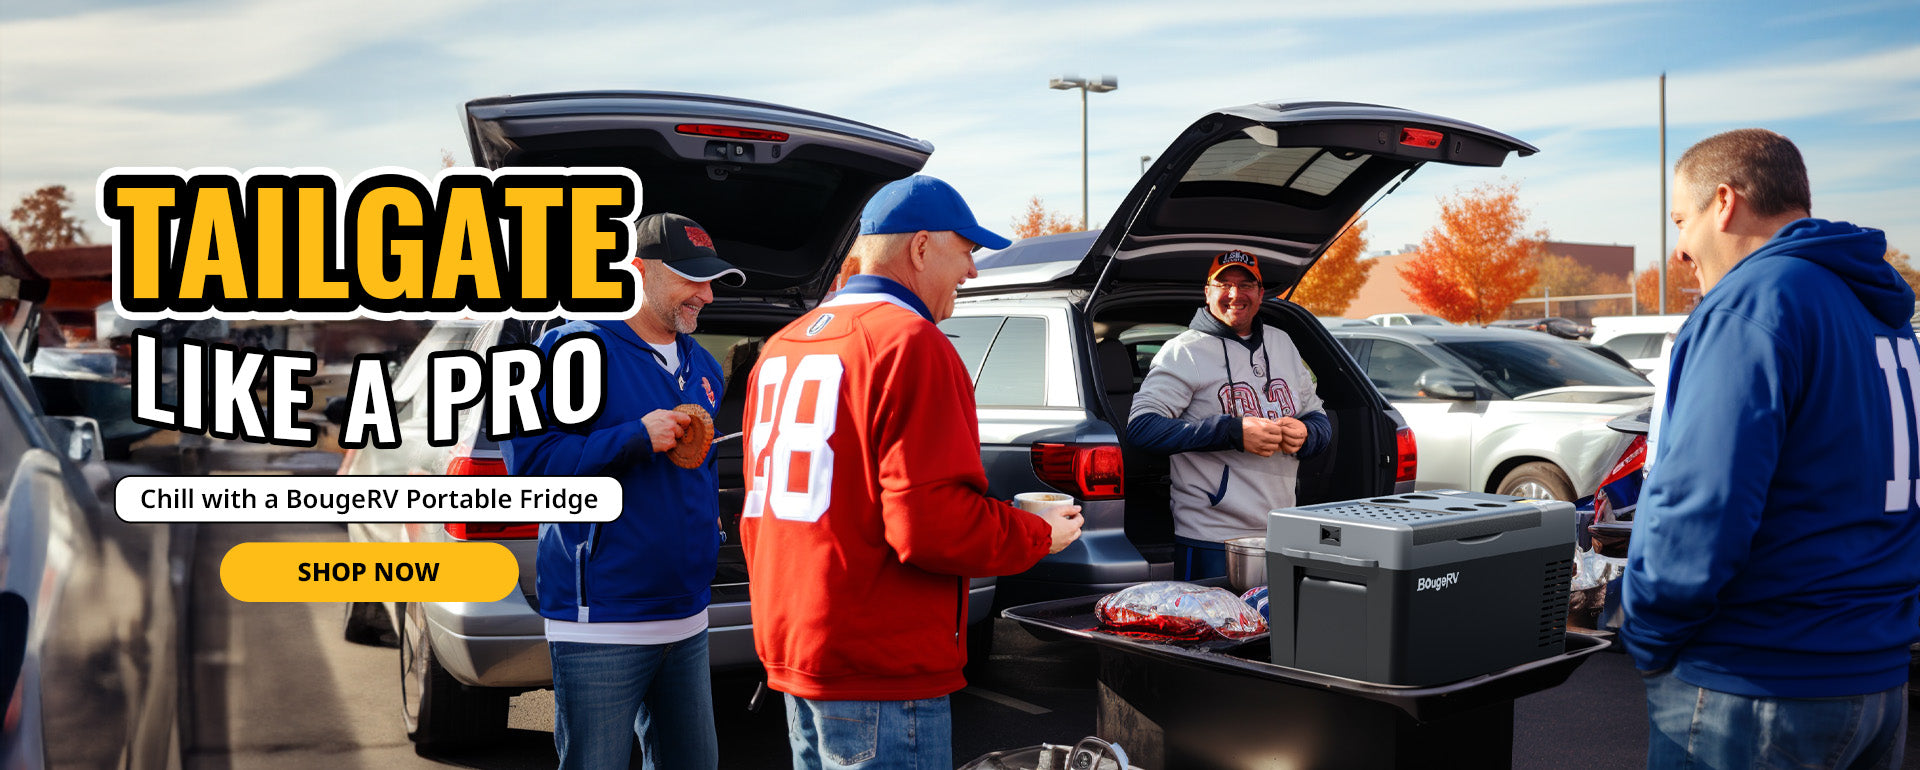 enjoy tailgating party with bougerv.jpg__PID:d75f7895-aa6b-49d4-b26d-6ff133edd41c